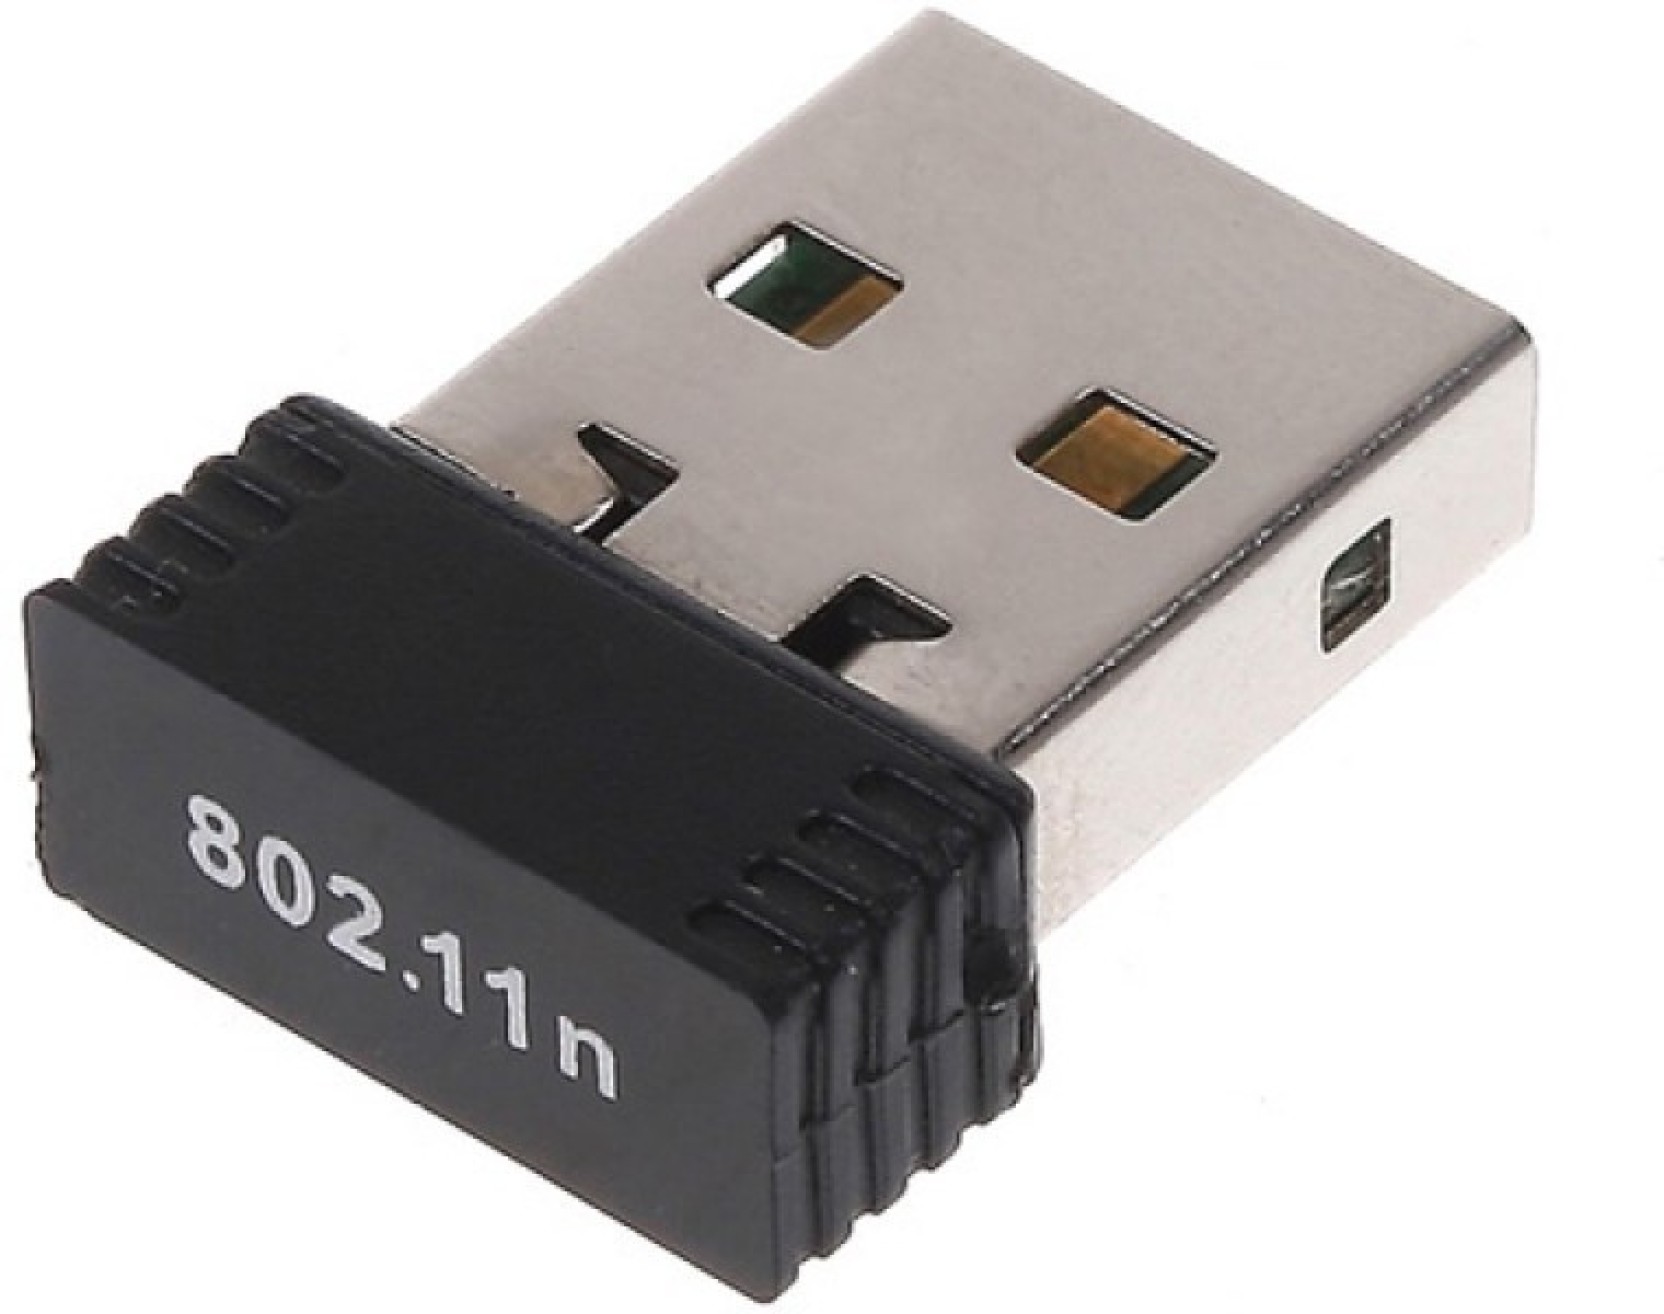 802.11 Wireless Usb Adapter Driver Download